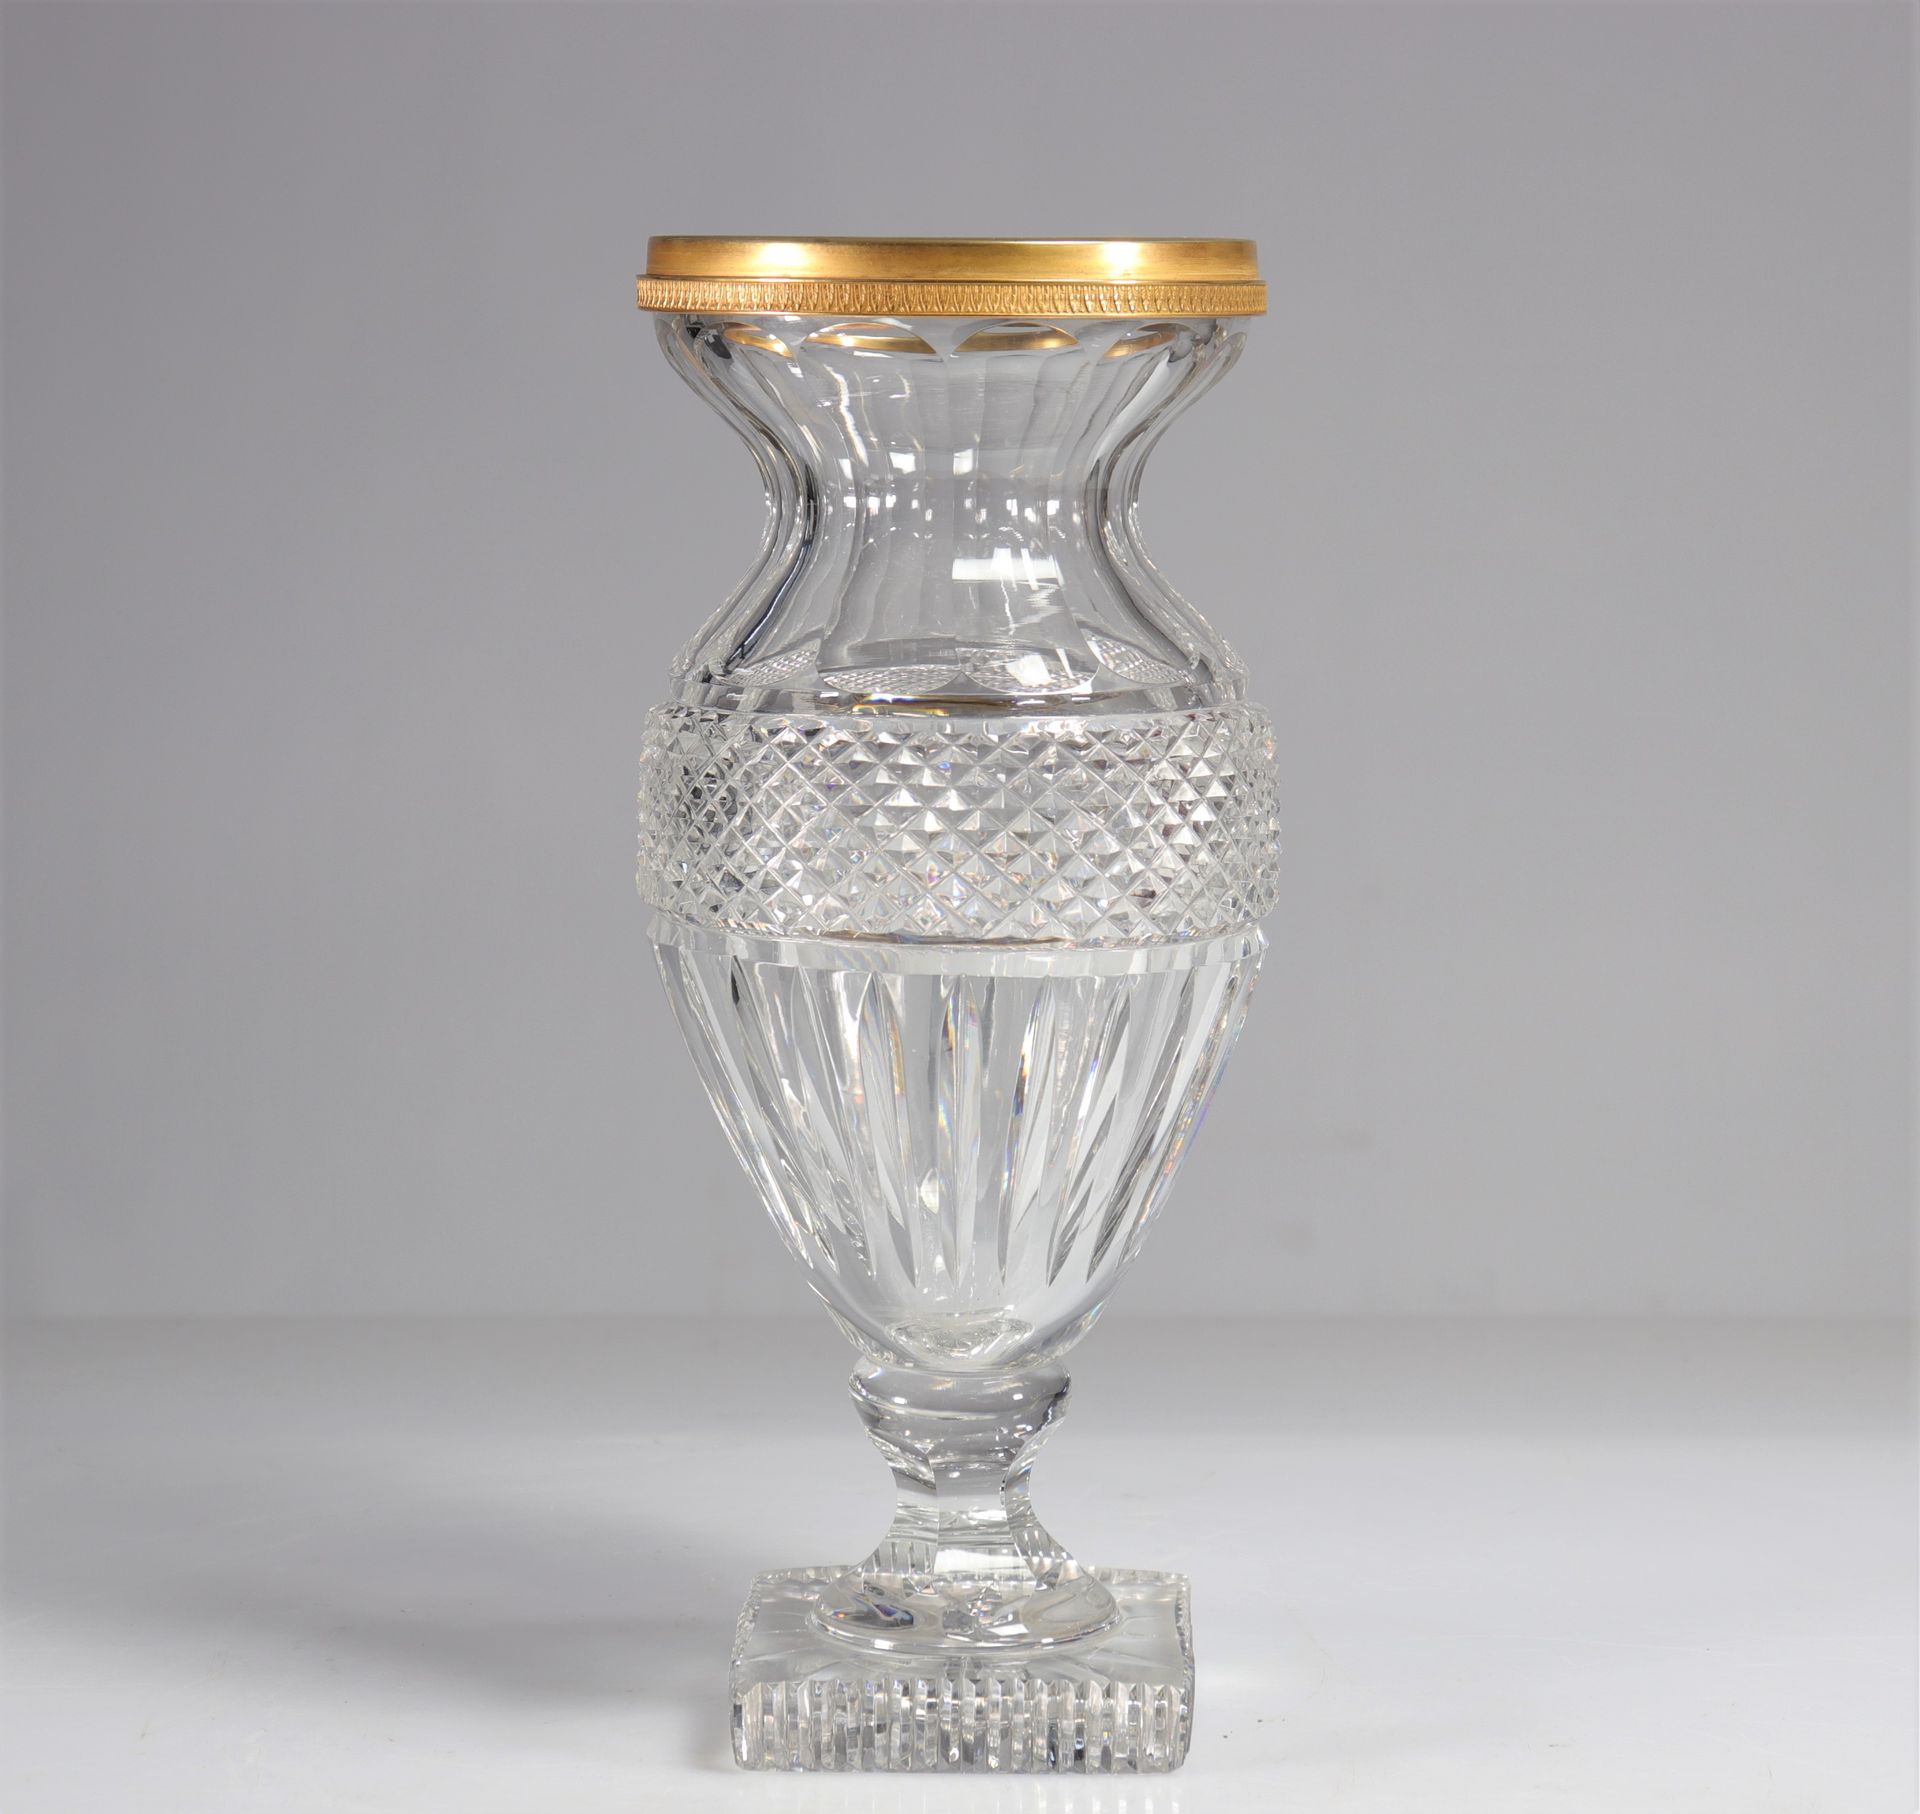 Null Baccarat crystal vase of Empire style with gilded bronze frame
Weight: 2.92&hellip;